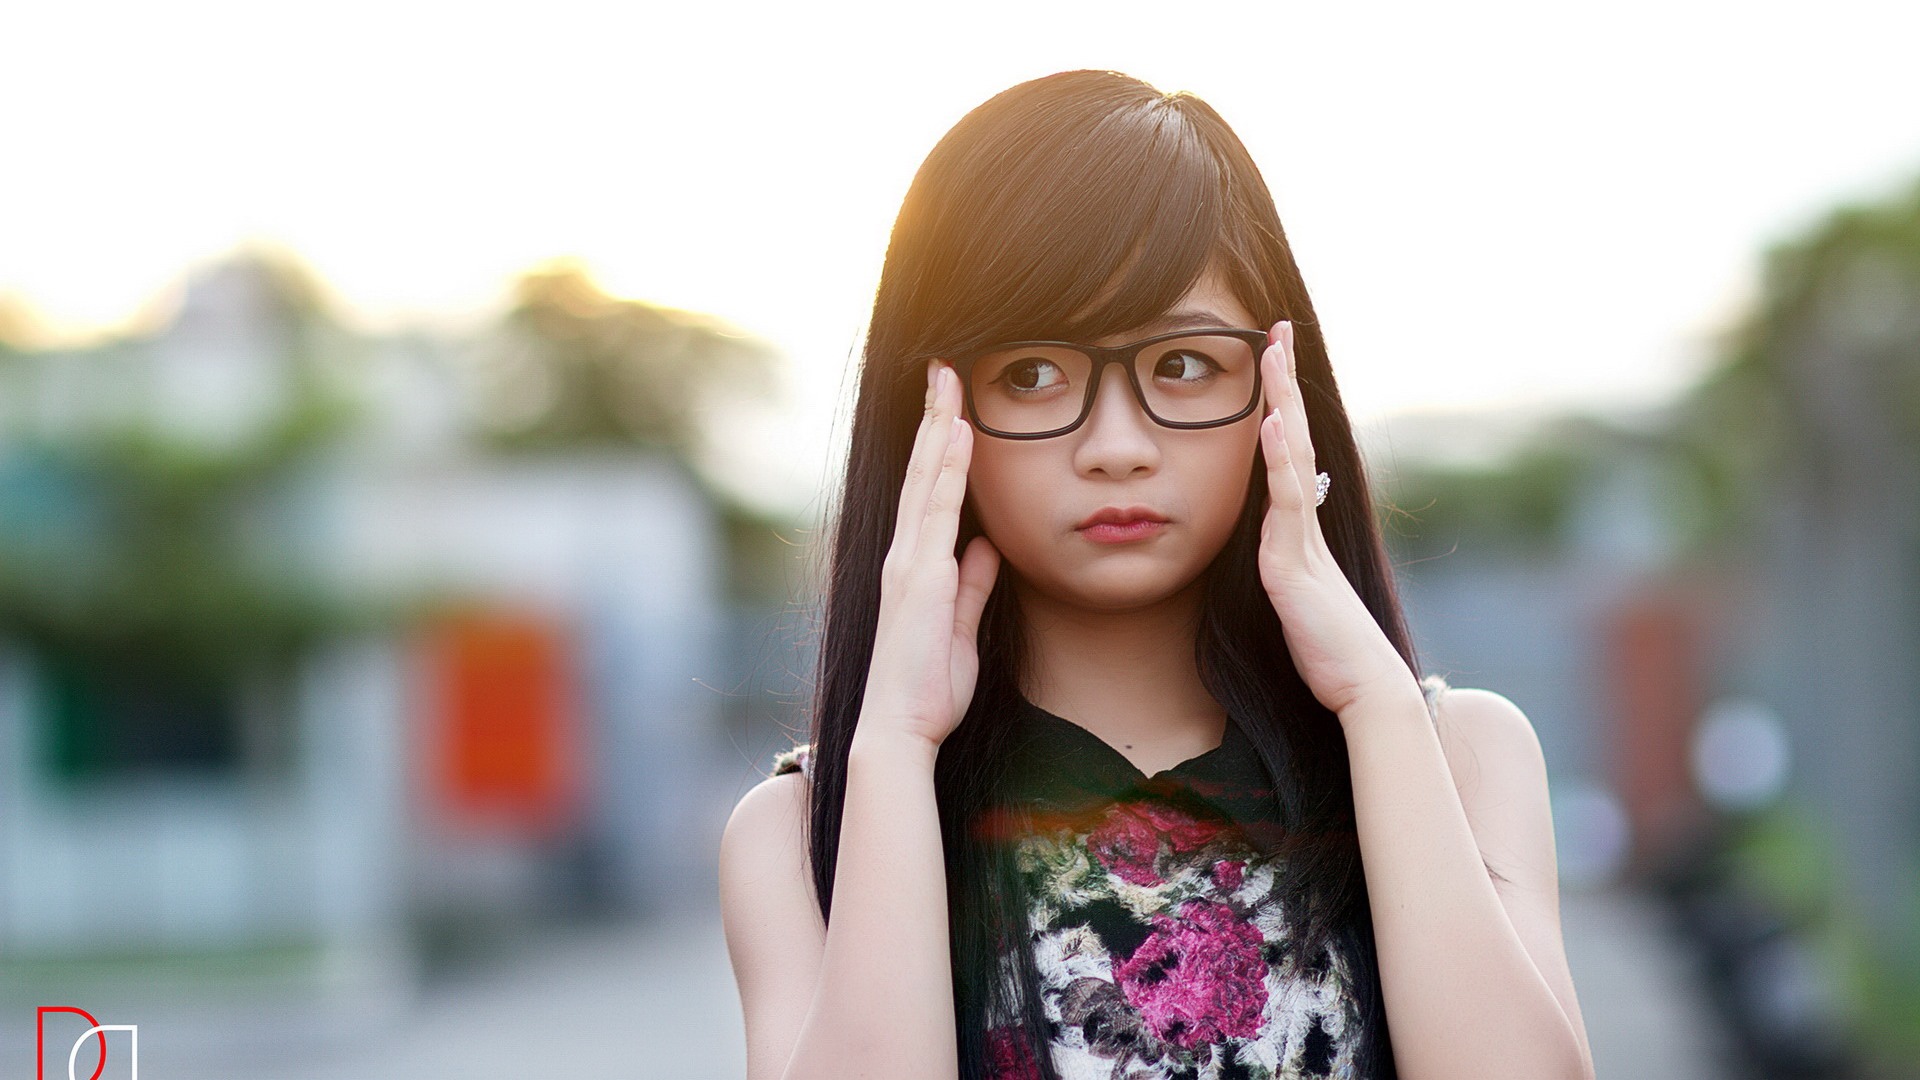 Pure and lovely young Asian girl HD wallpapers collection (3) #34 - 1920x1080